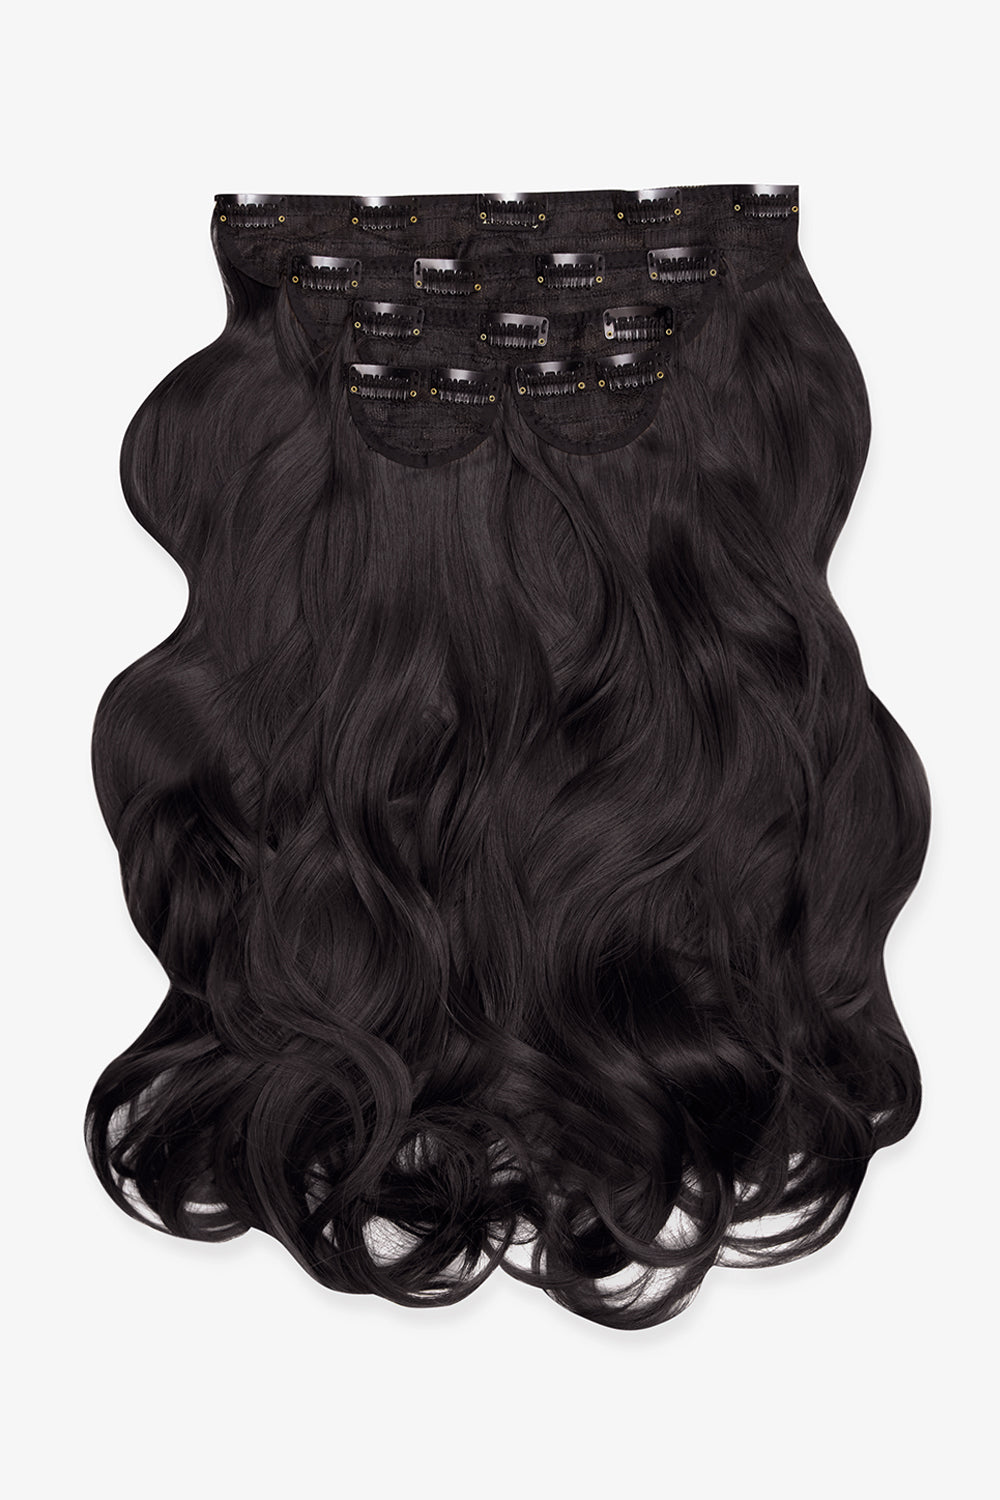 Super Thick 22" 5 Piece Natural Wavy Clip In Hair Extensions - LullaBellz - Raven